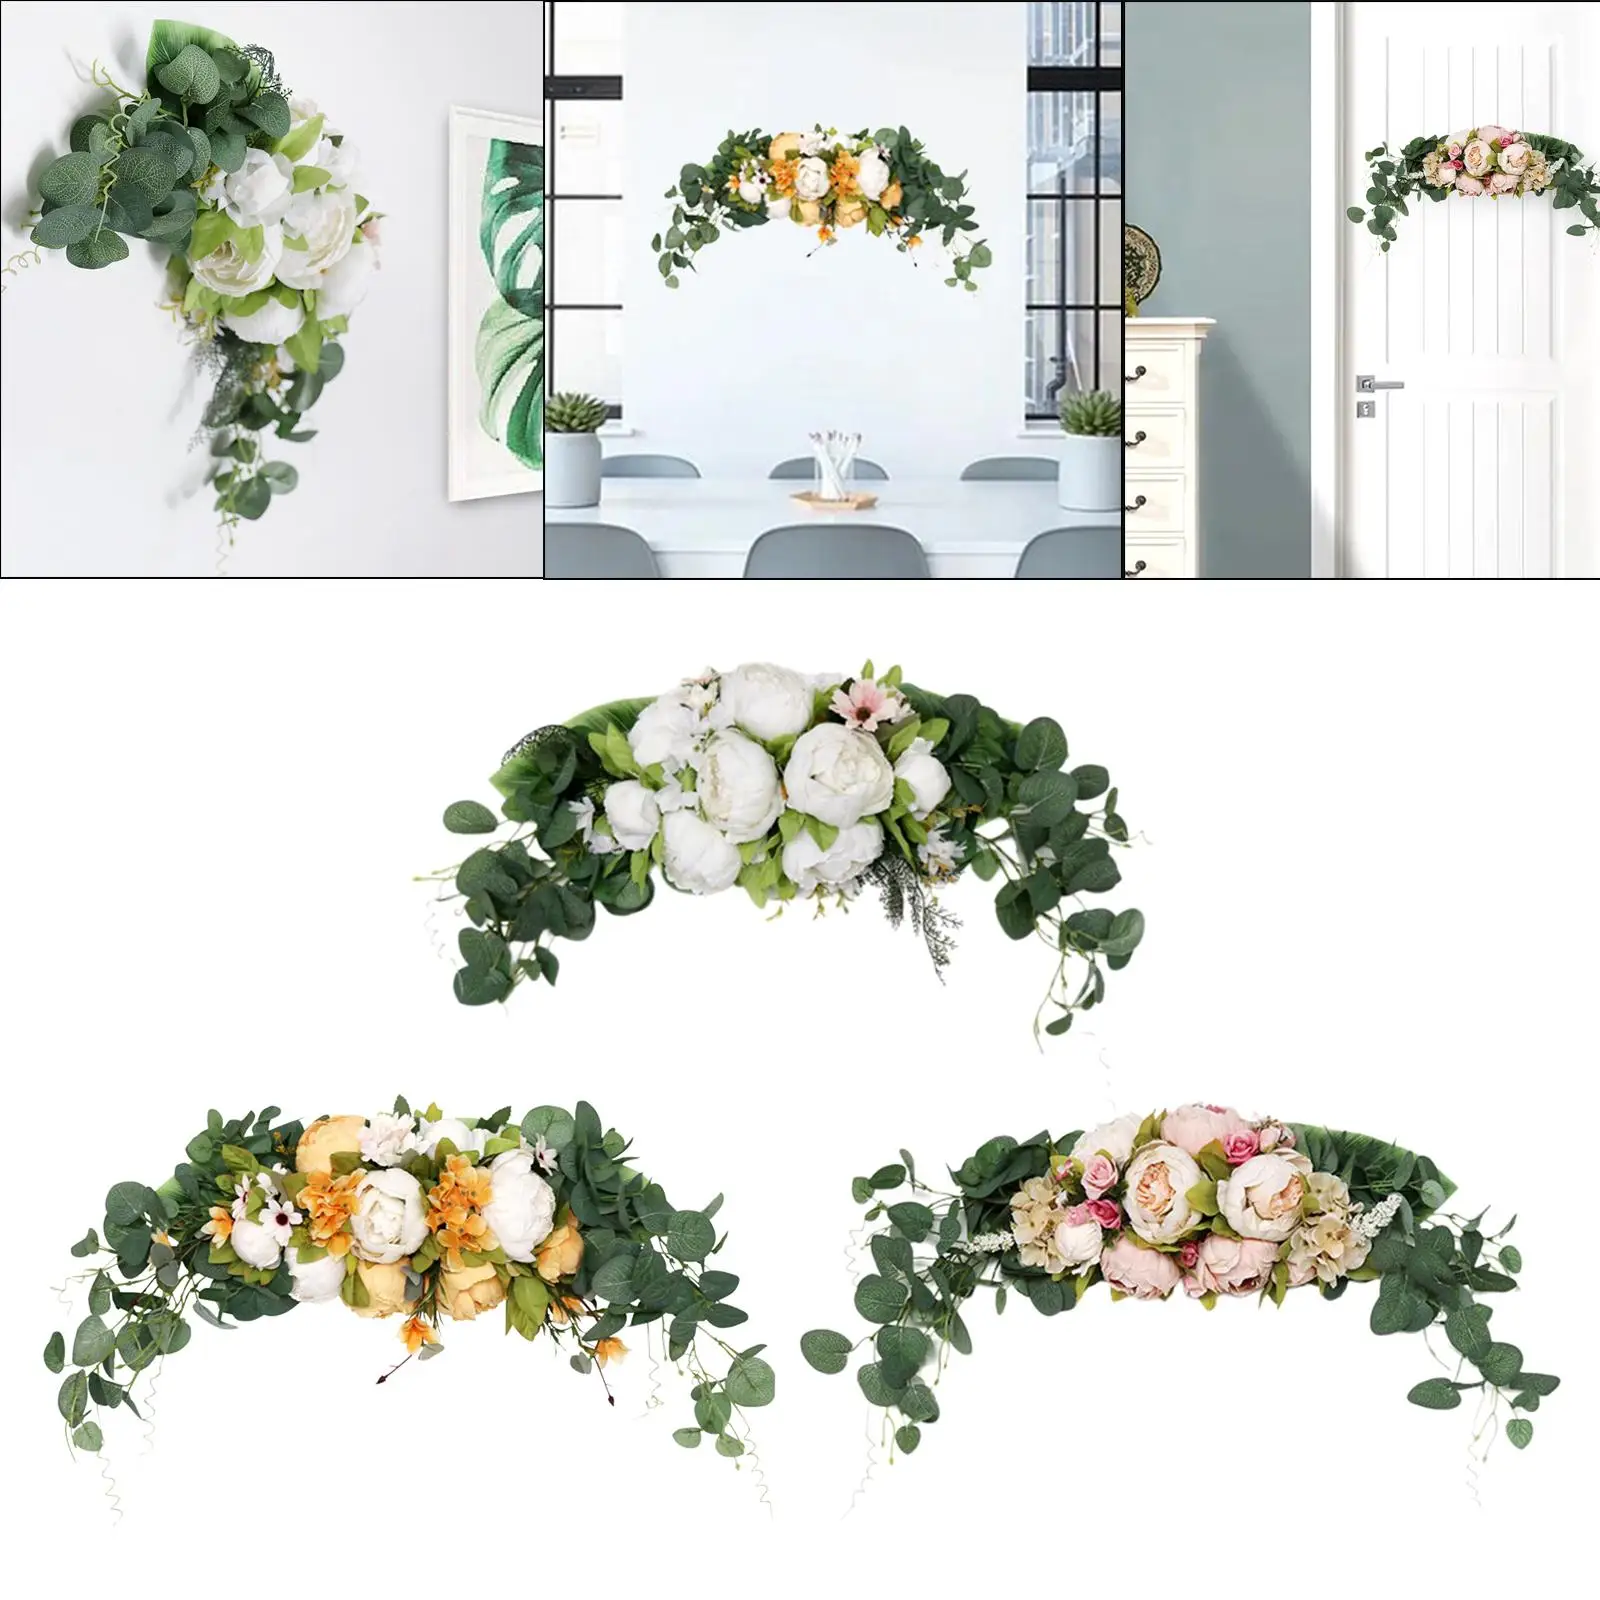 29.5inch Artificial Floral Garland Decorative Swag for Wedding Ceremony Sign